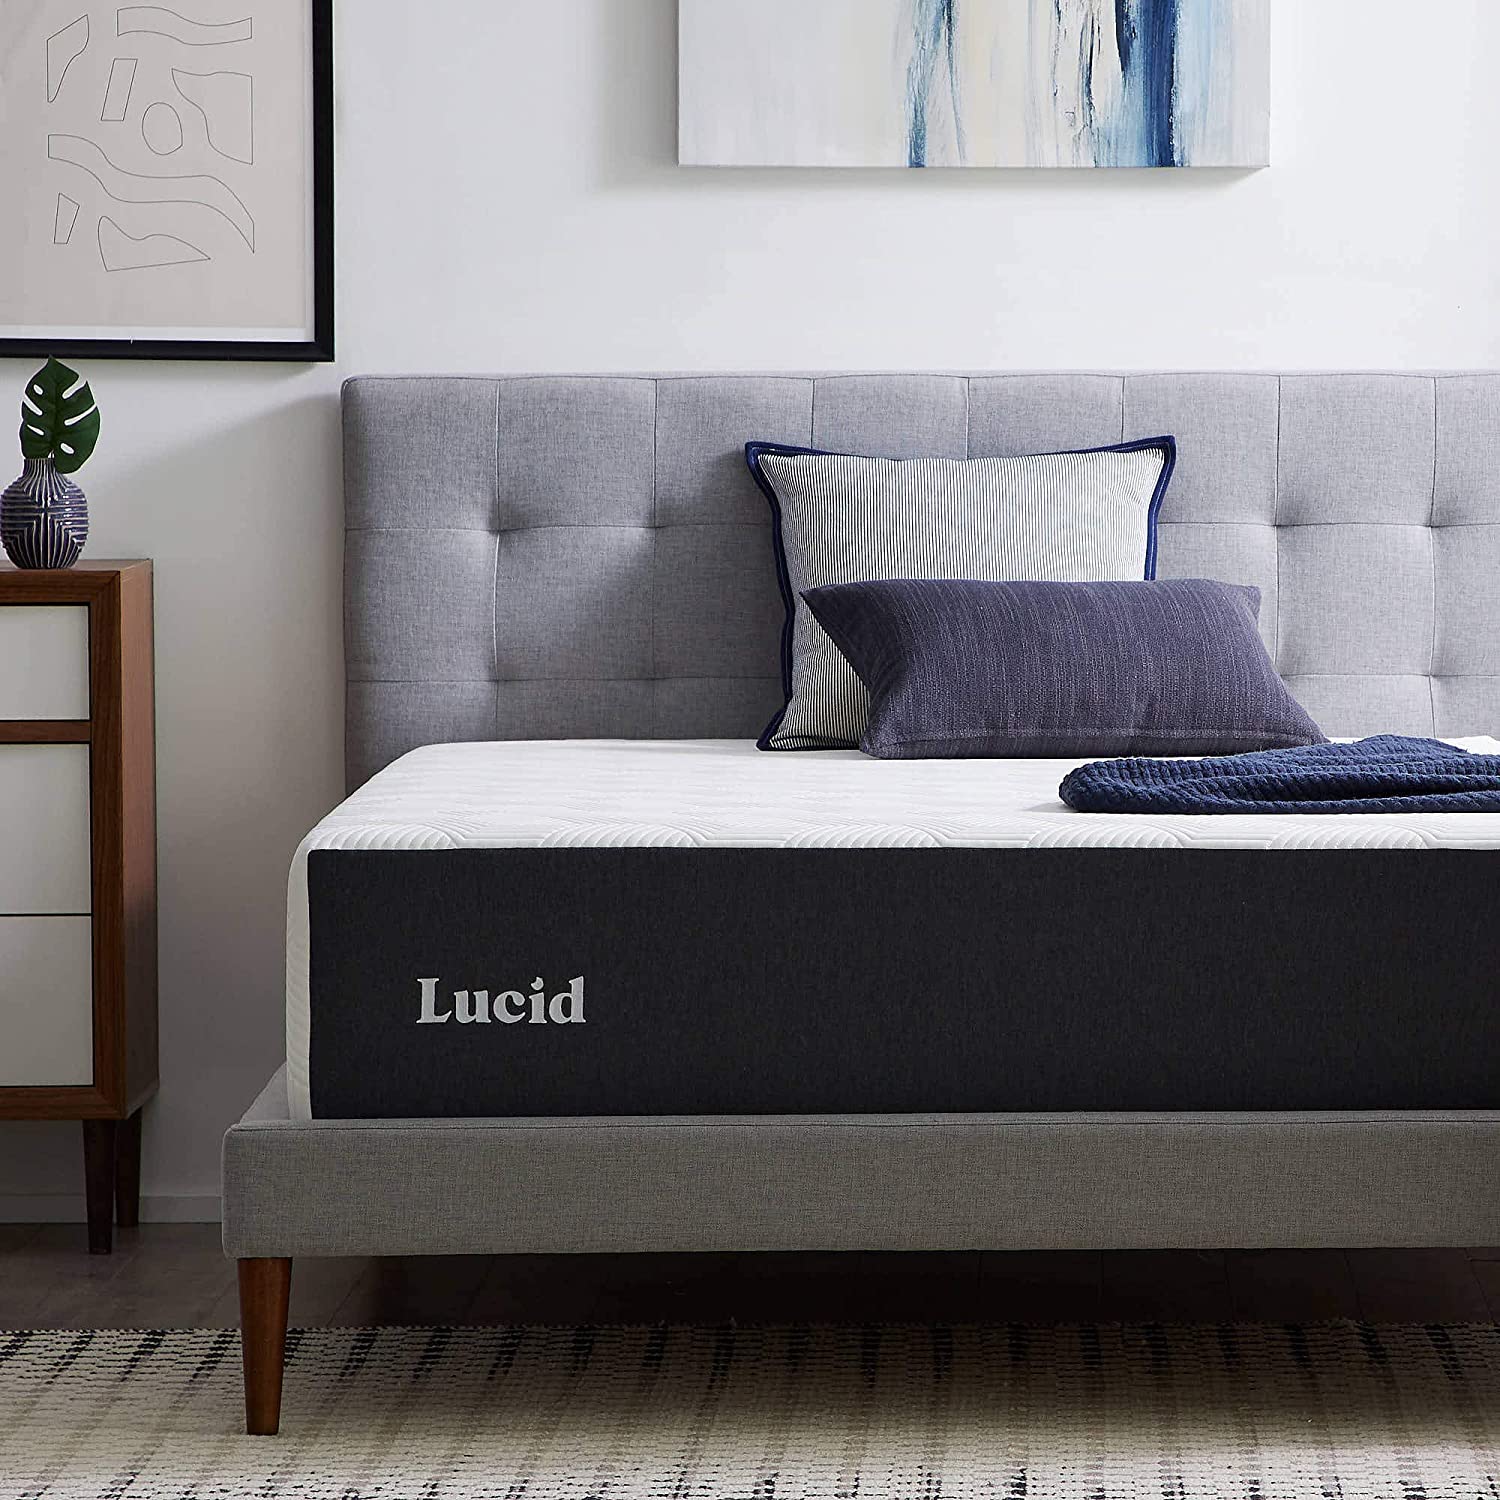 Lucid Bamboo Charcoal King Mattress Product